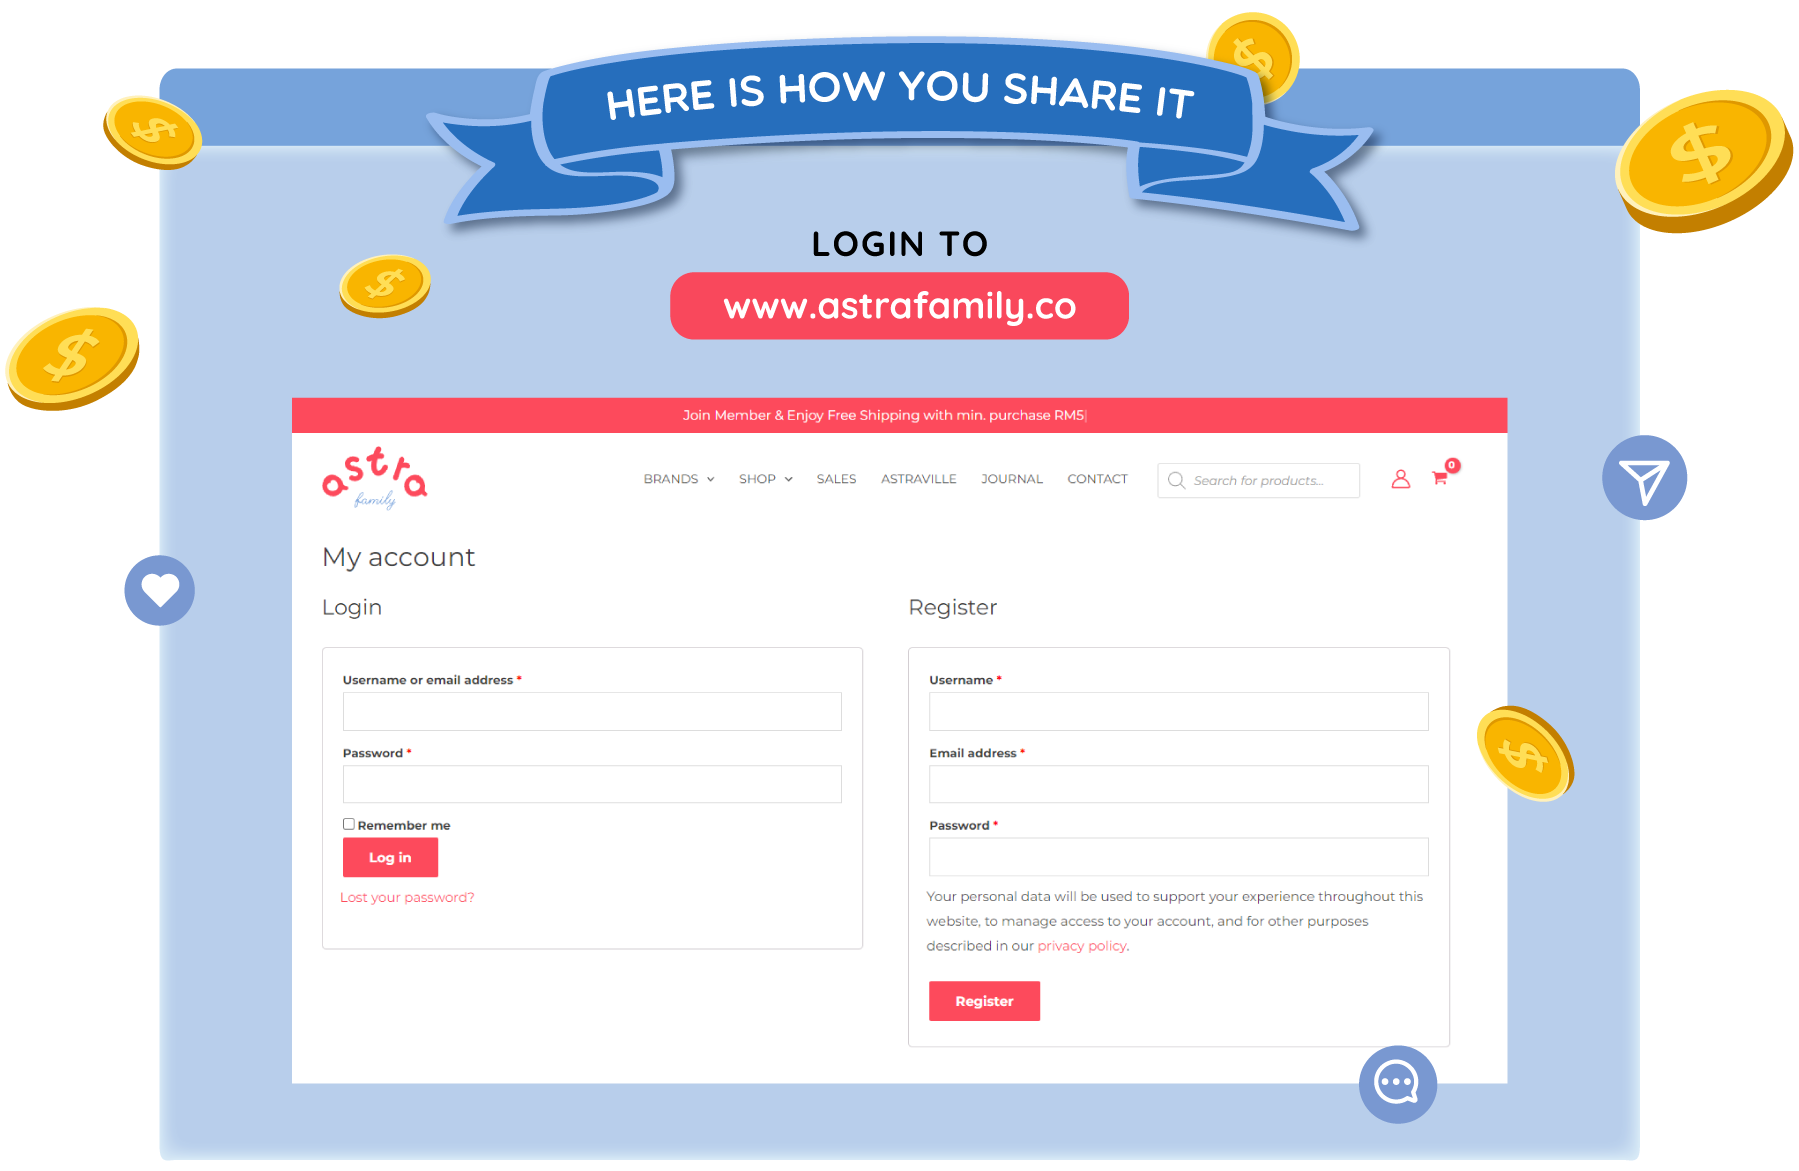 astra-family-astraville-share-and-earn-process-01